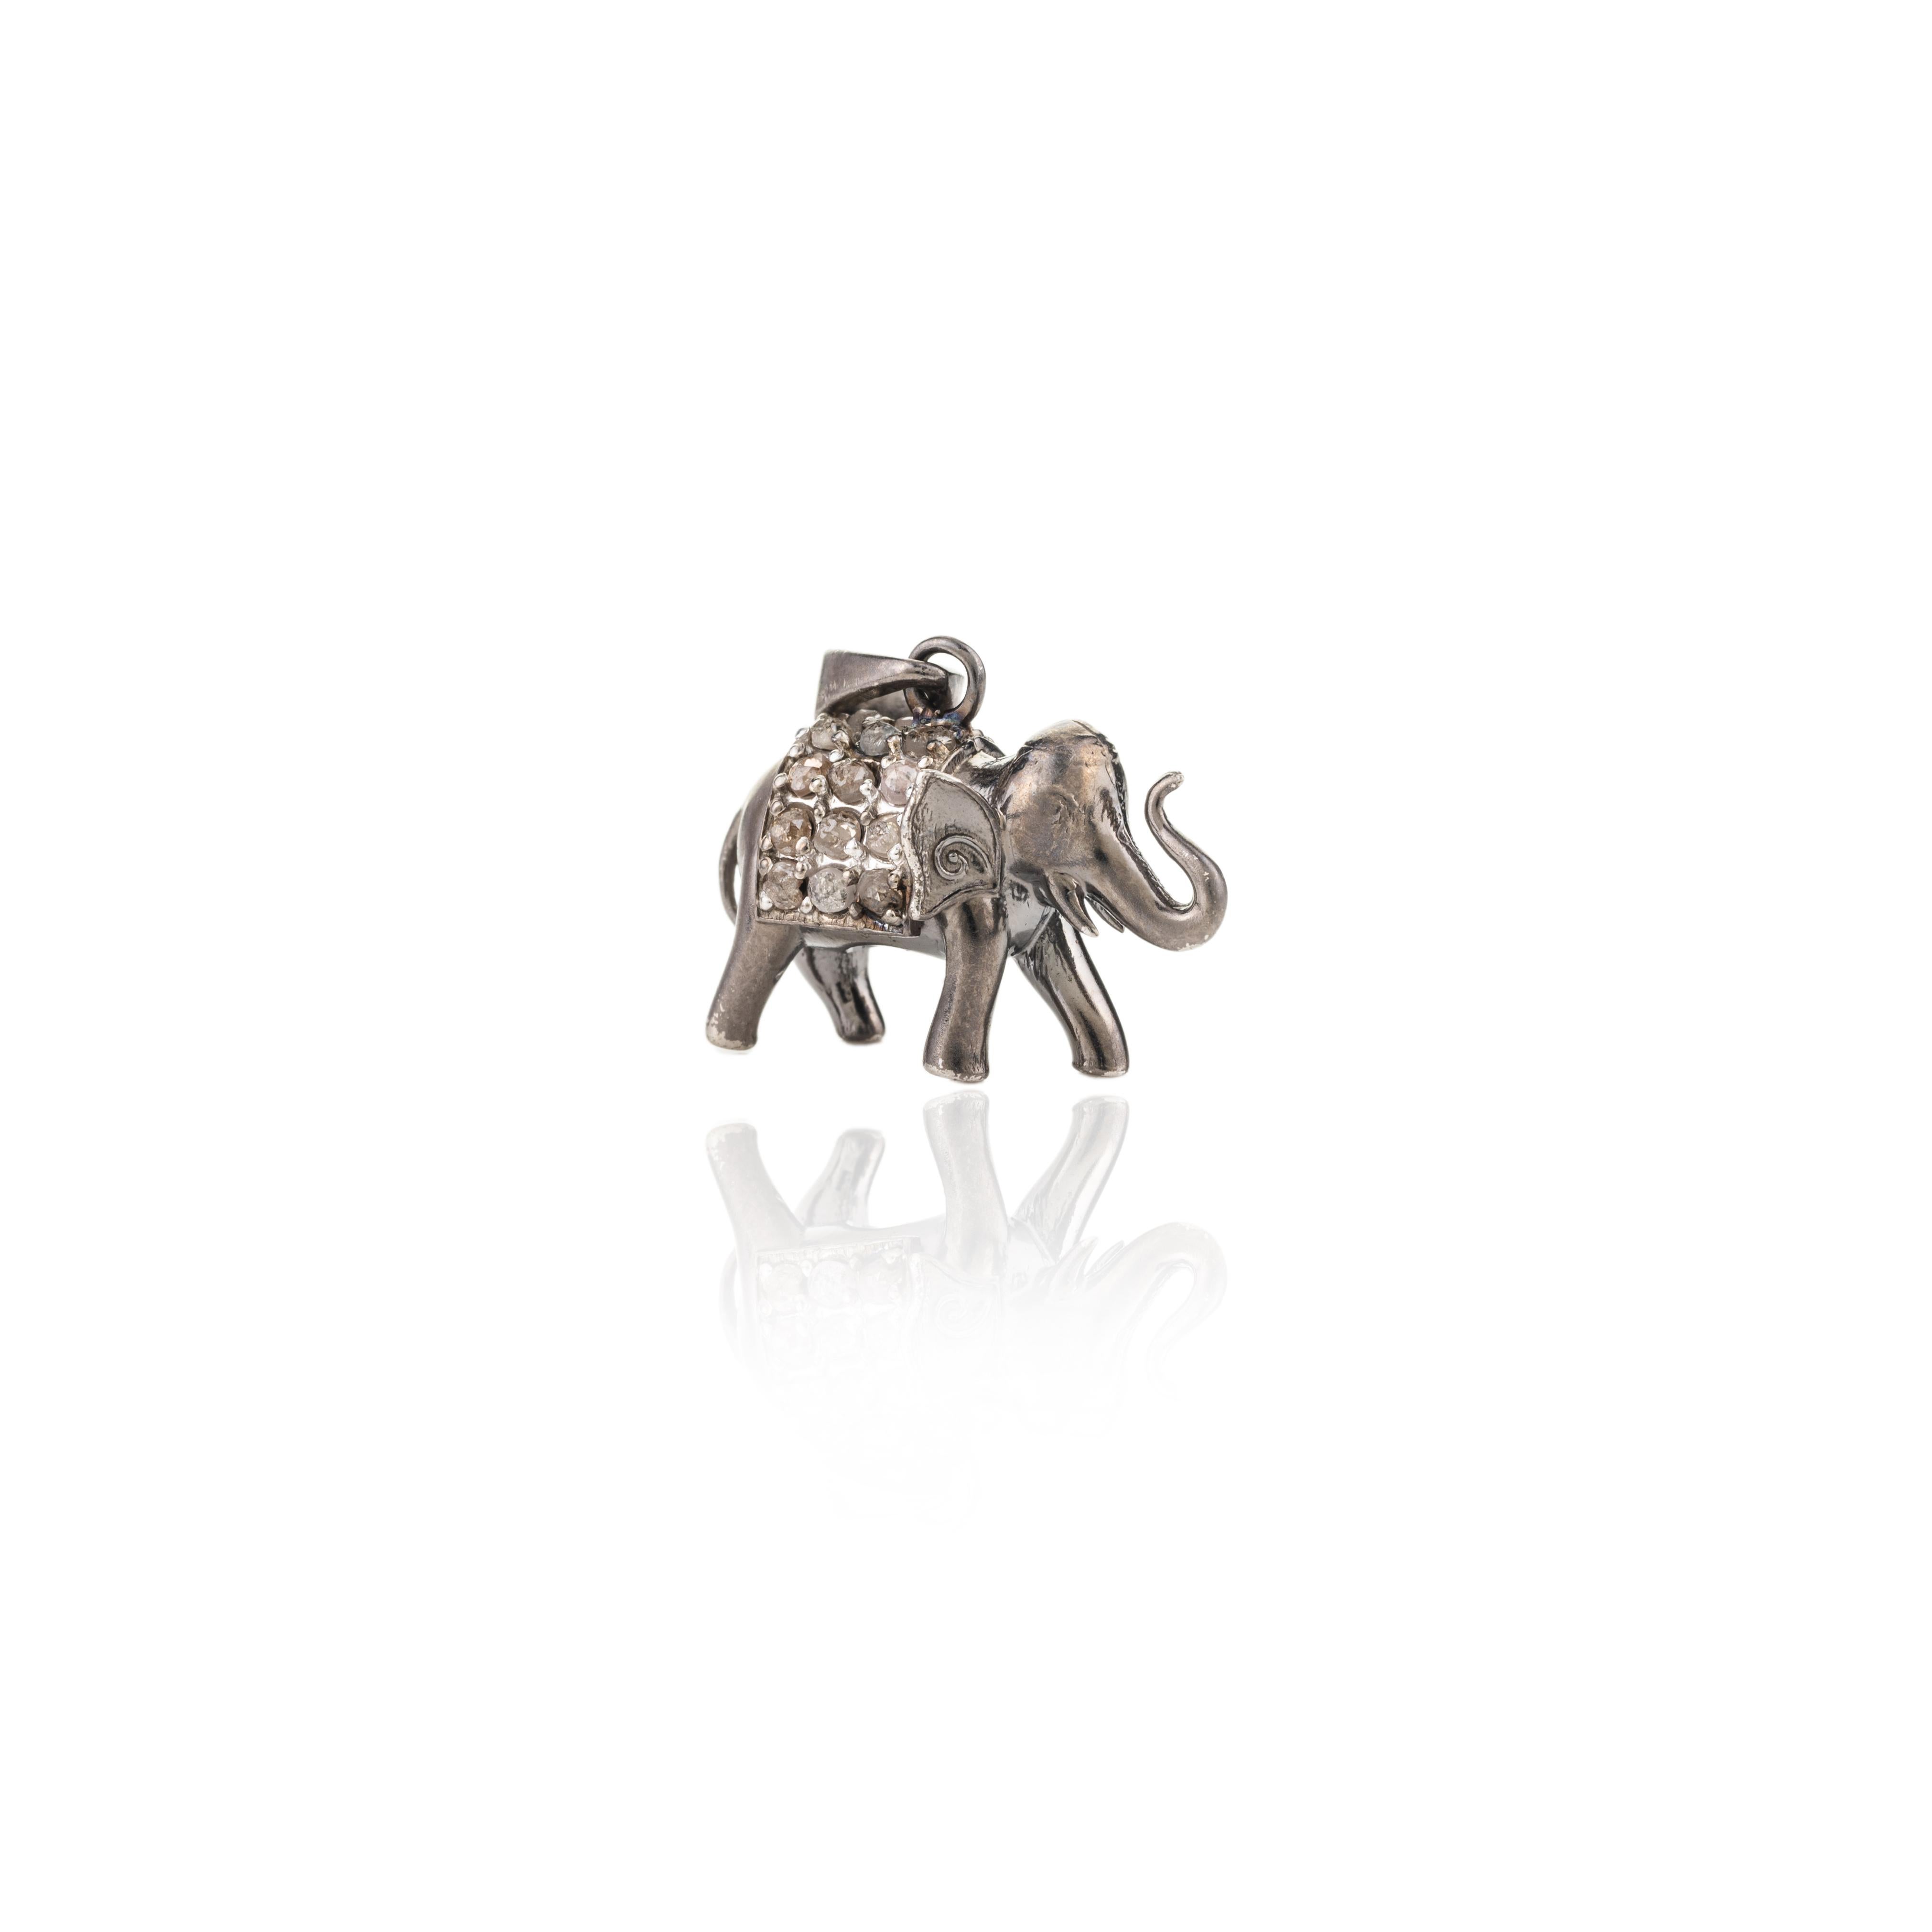 Women's Vintage Style 925 Sterling Silver Diamond Elephant Pendant Unisex Gifts For Sale